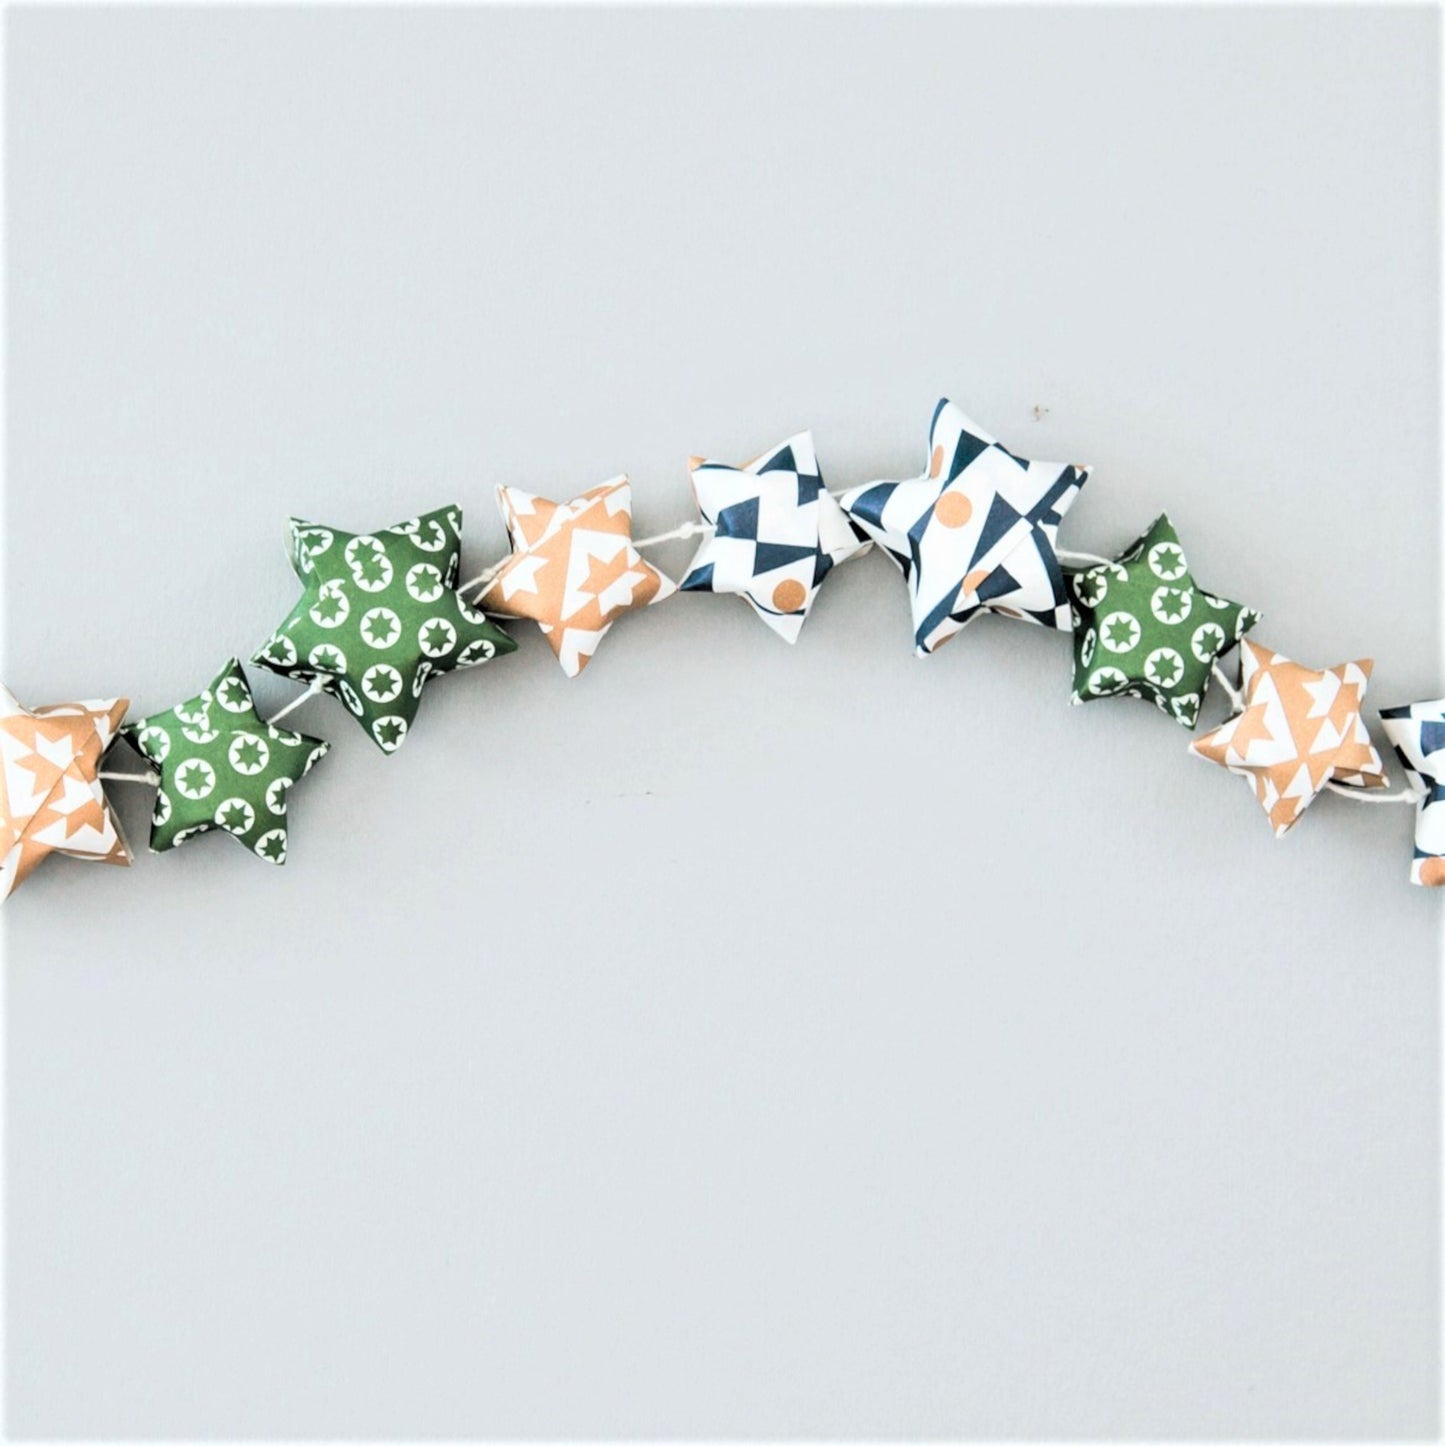 A garland of small paper origami patterned stars "lucky stars" in green, gold and dark blue